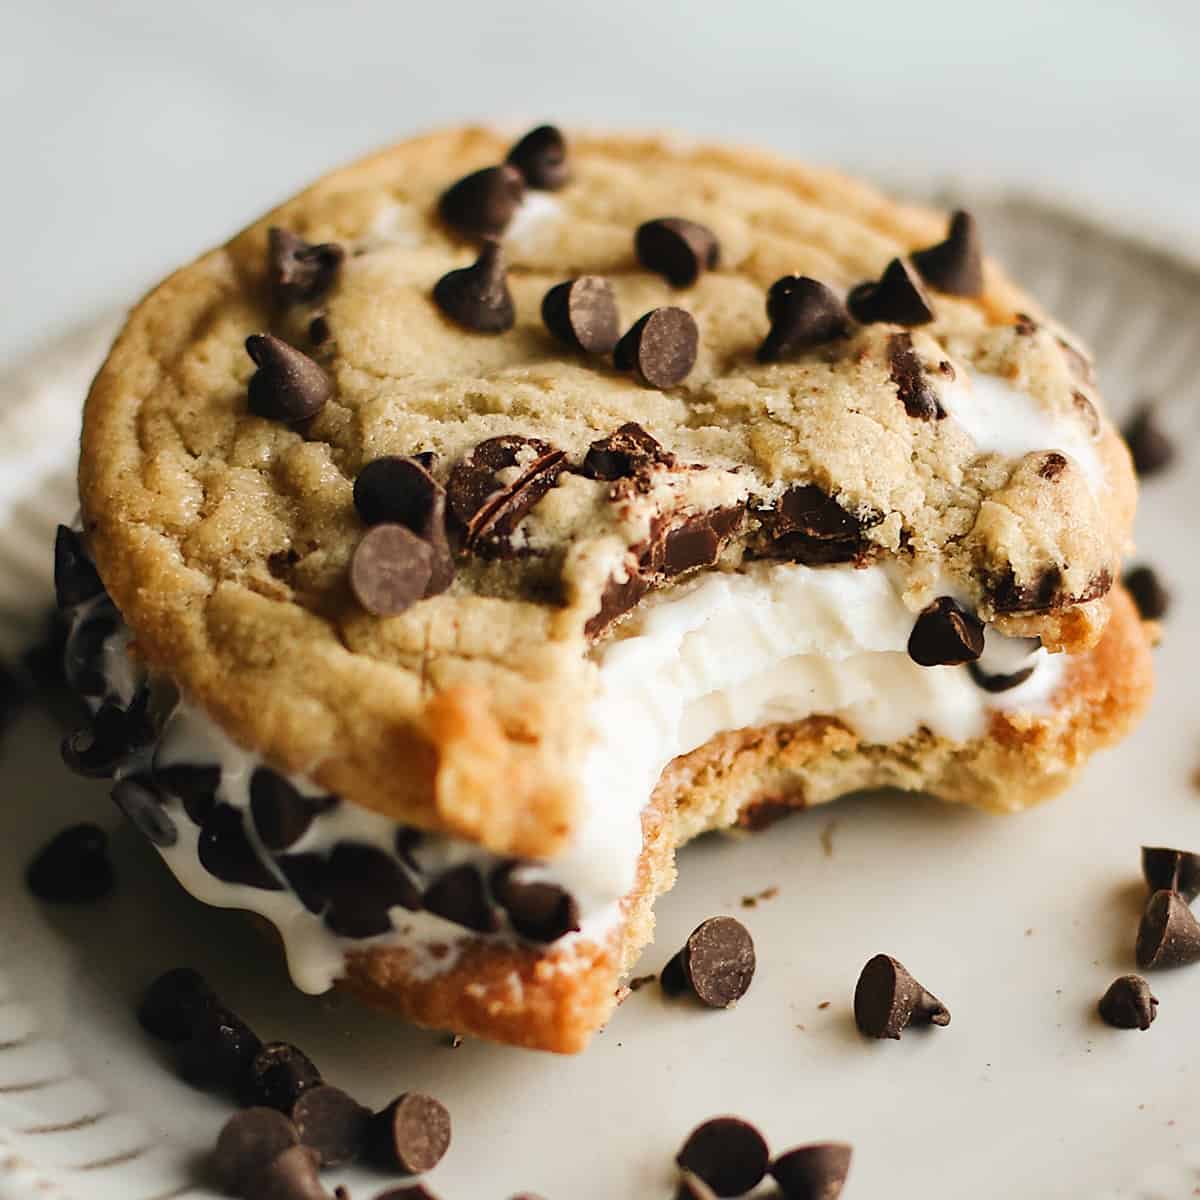 Cookie Ice Cream Sandwiches (Like A Chipwich!) - Sally's Baking Addiction